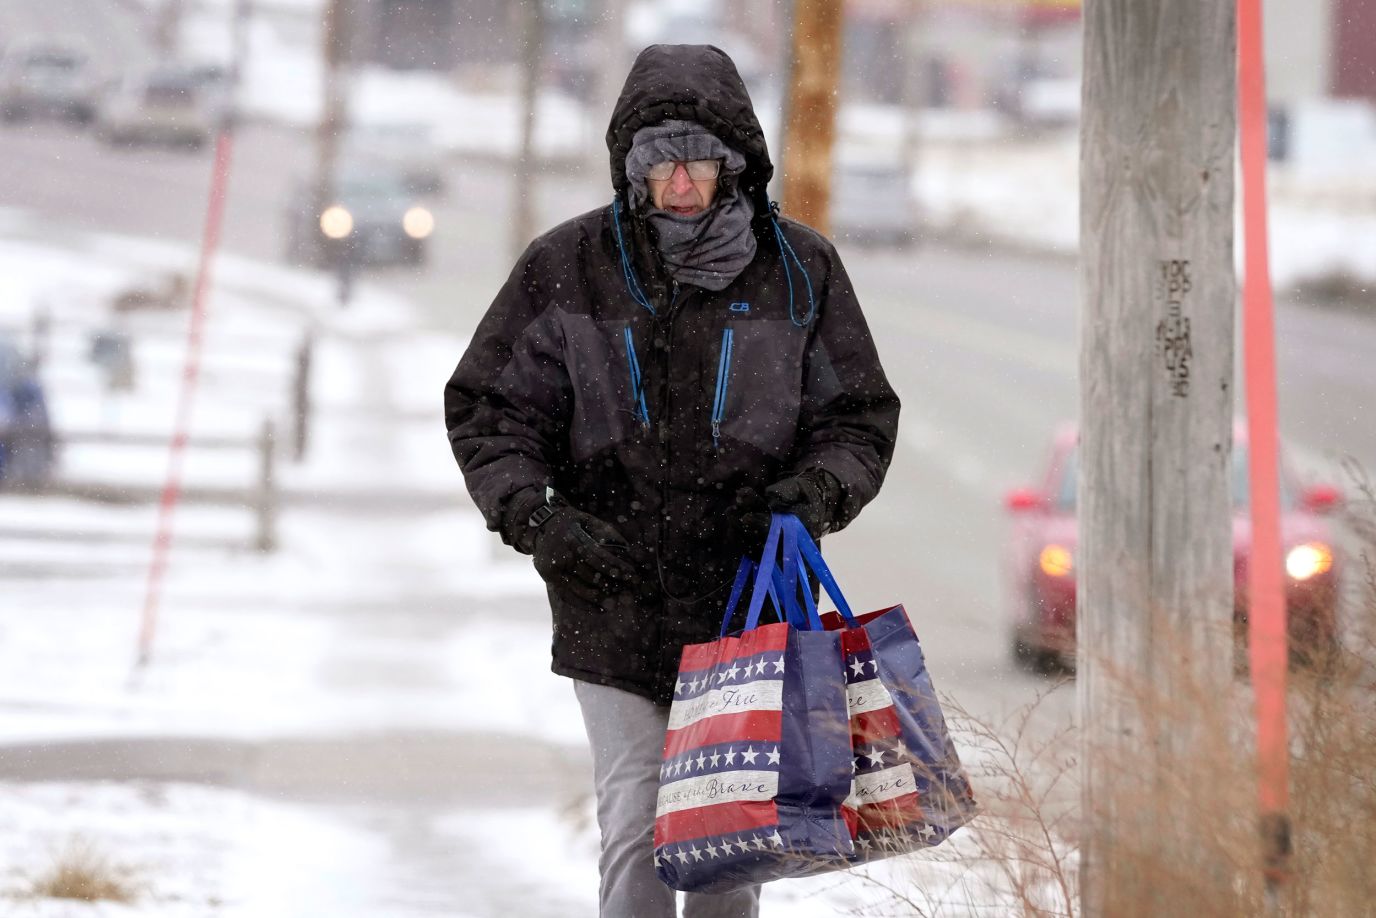 Greg Behrens tries to stay warm as he walks on a snow-covered sidewalk in Des Moines, Iowa, on December 21. 